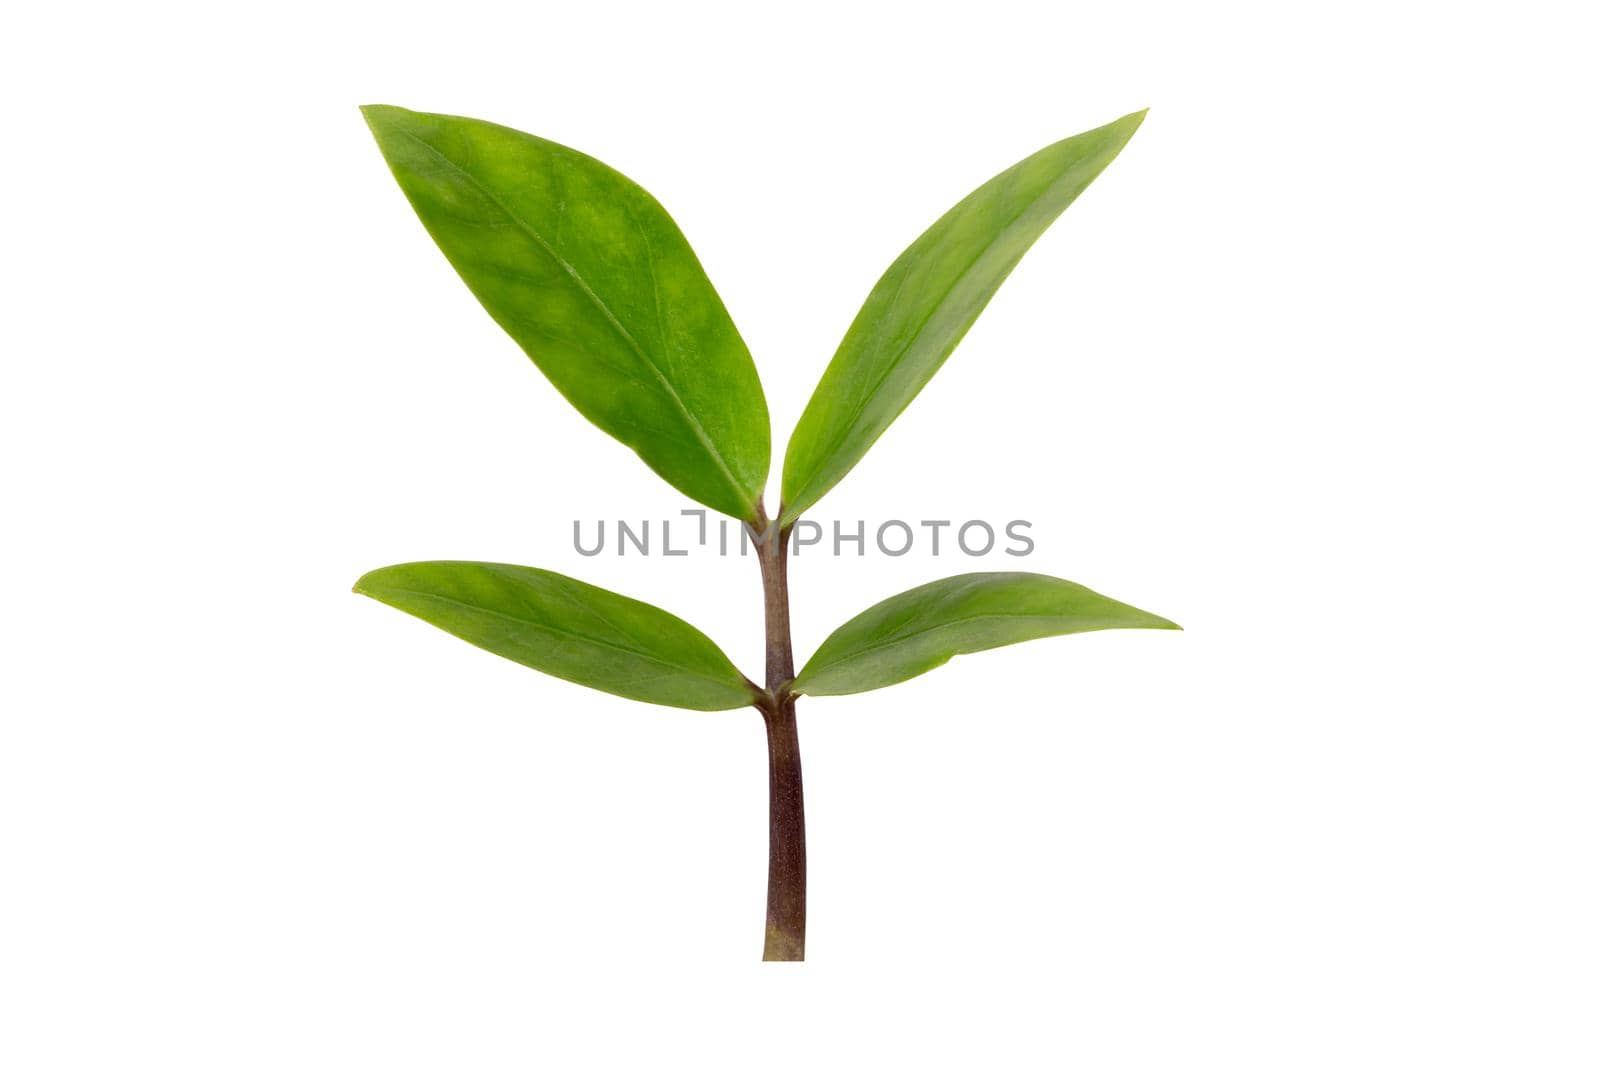 Green leaf and stem isolated on white background, closeup green leaves and growth is element isolate.